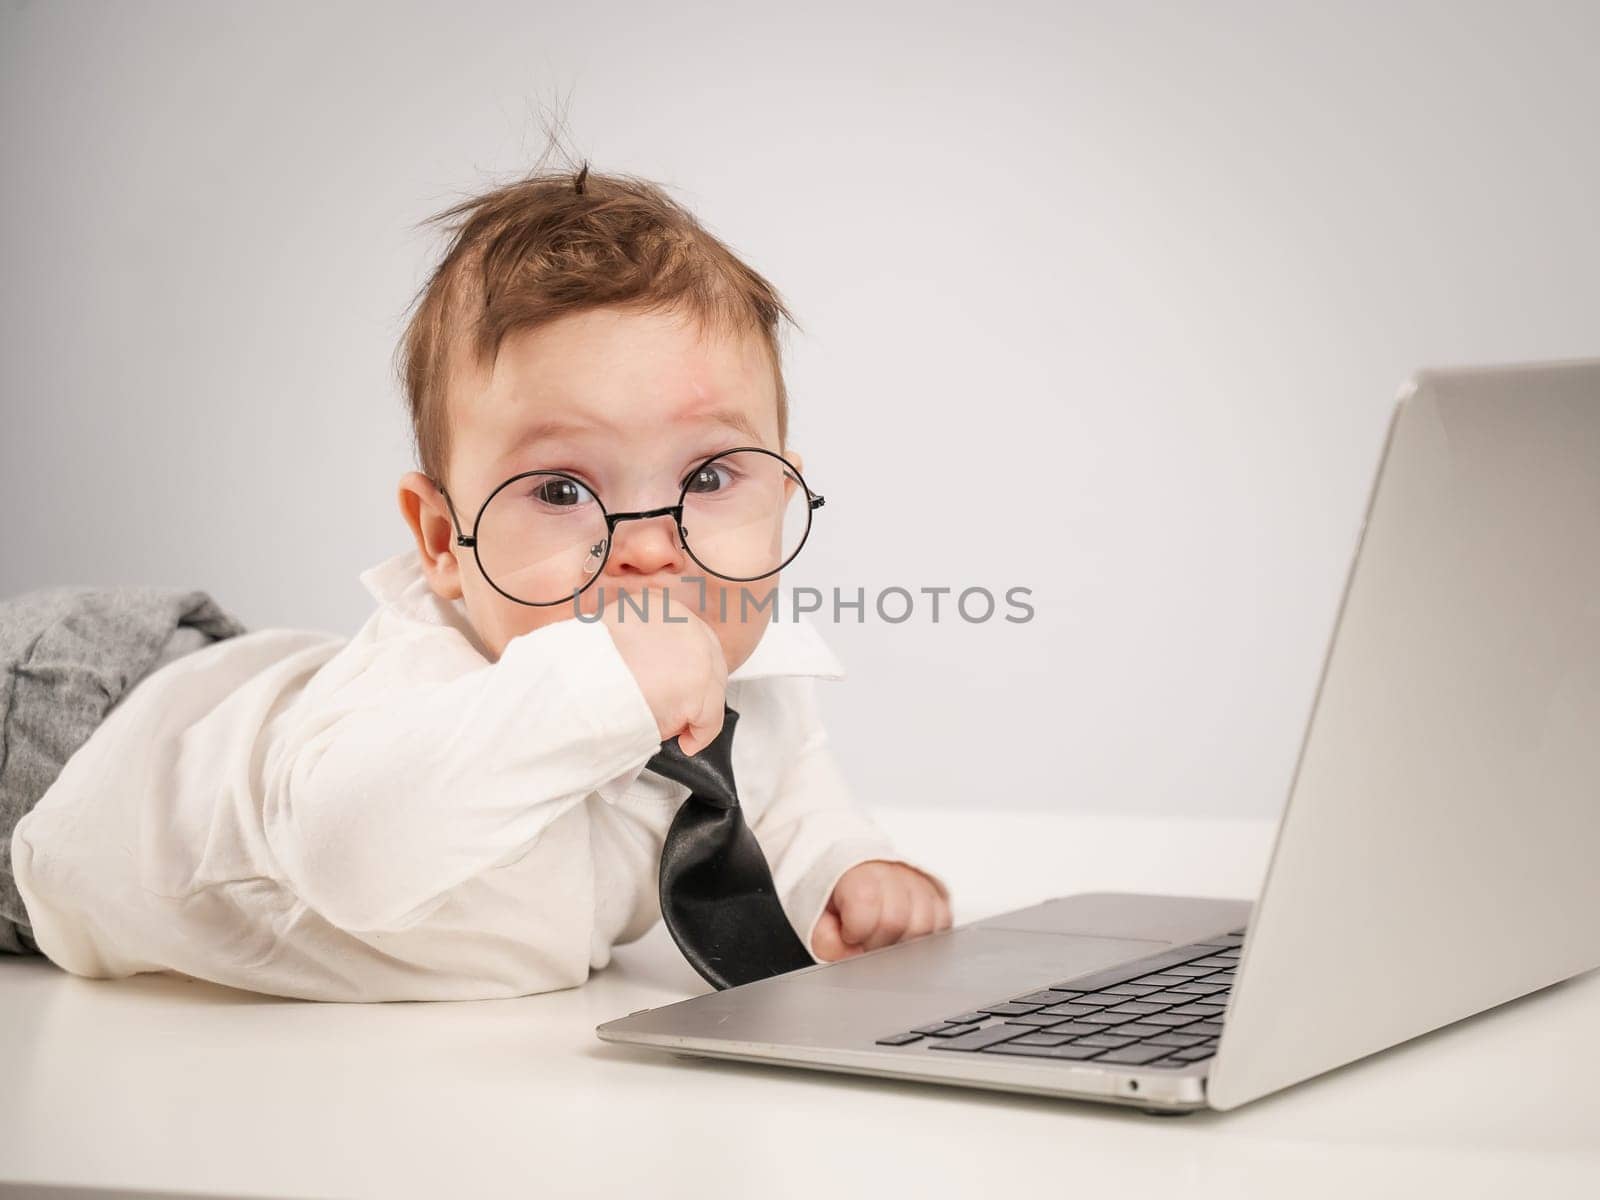 Cute baby in glasses and suit working on laptop. by mrwed54